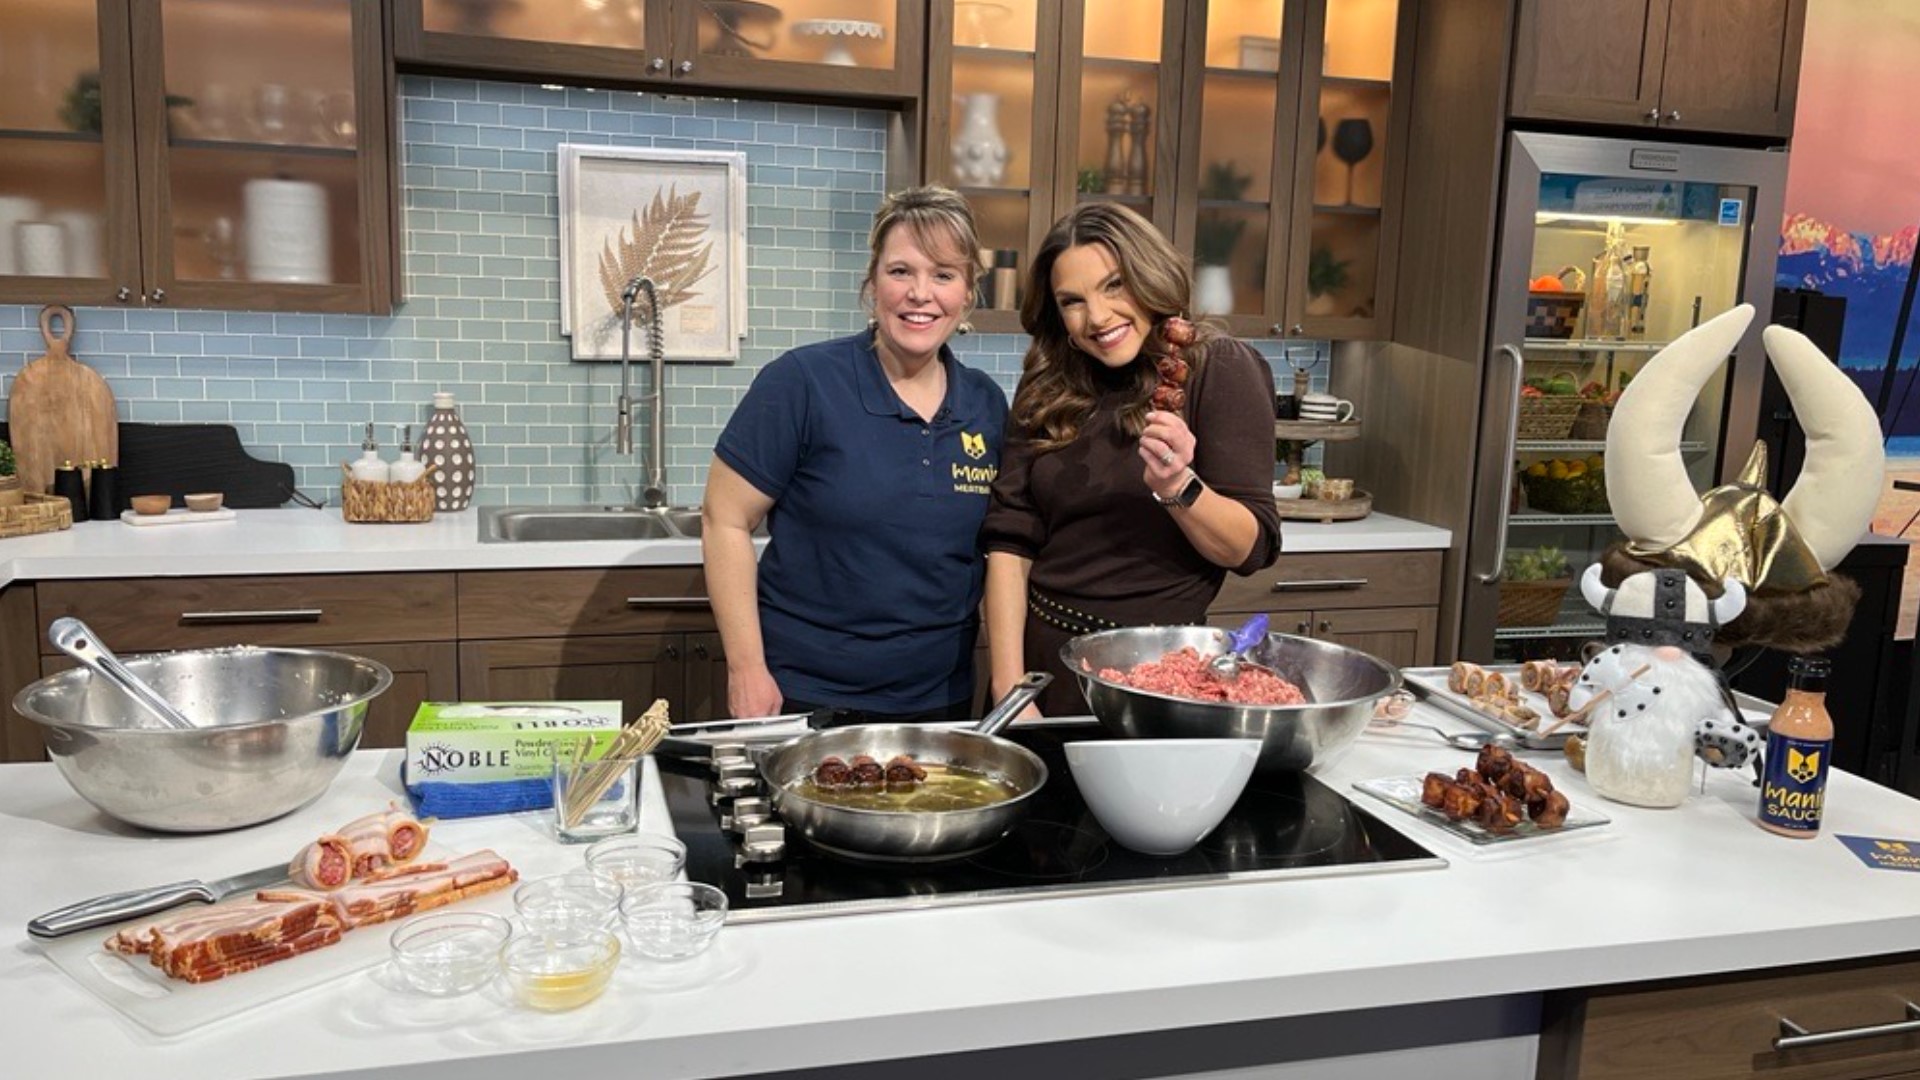 Carrie Stalder from Manic Meatball in Lakewood shows Amity how to make their famous bacon-wrapped meatball - perfect for a game day snack or a potluck.